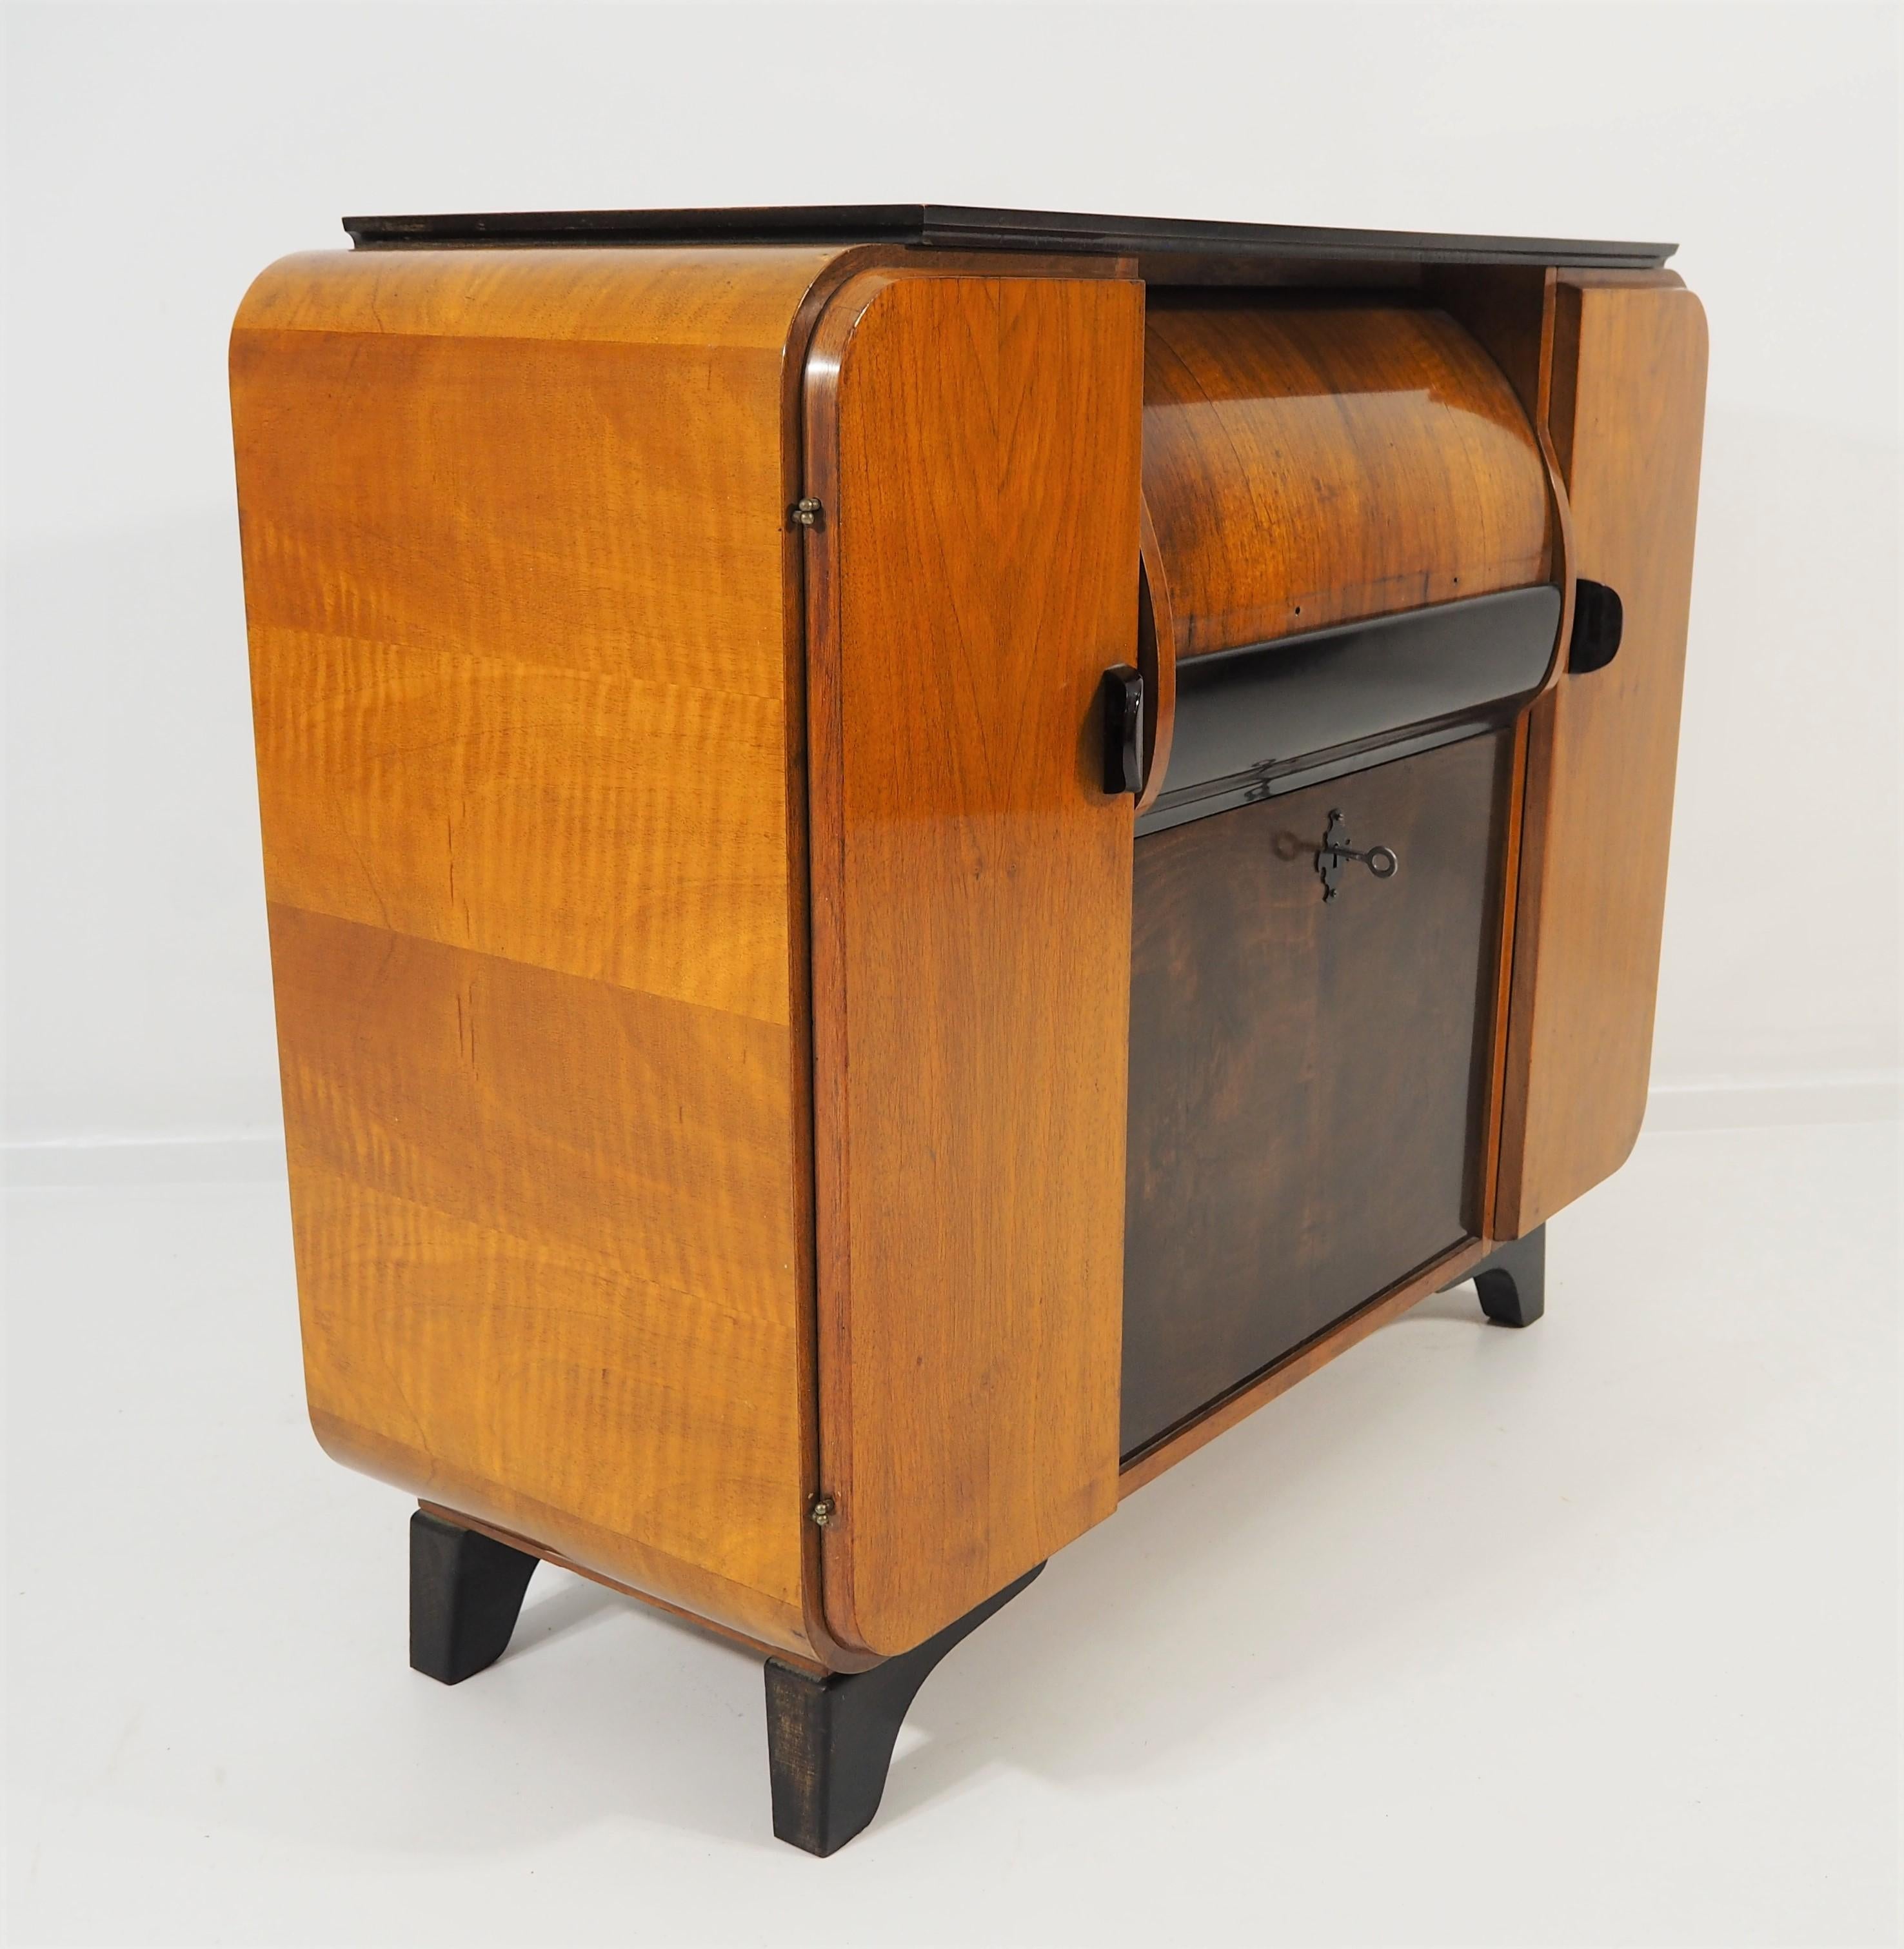 Rarity record player from Supraphon, 1959. Original condition. This piece of furniture and the disc player is in original condition. It resembles the designs of the Czech designer Jindrich Halabala.